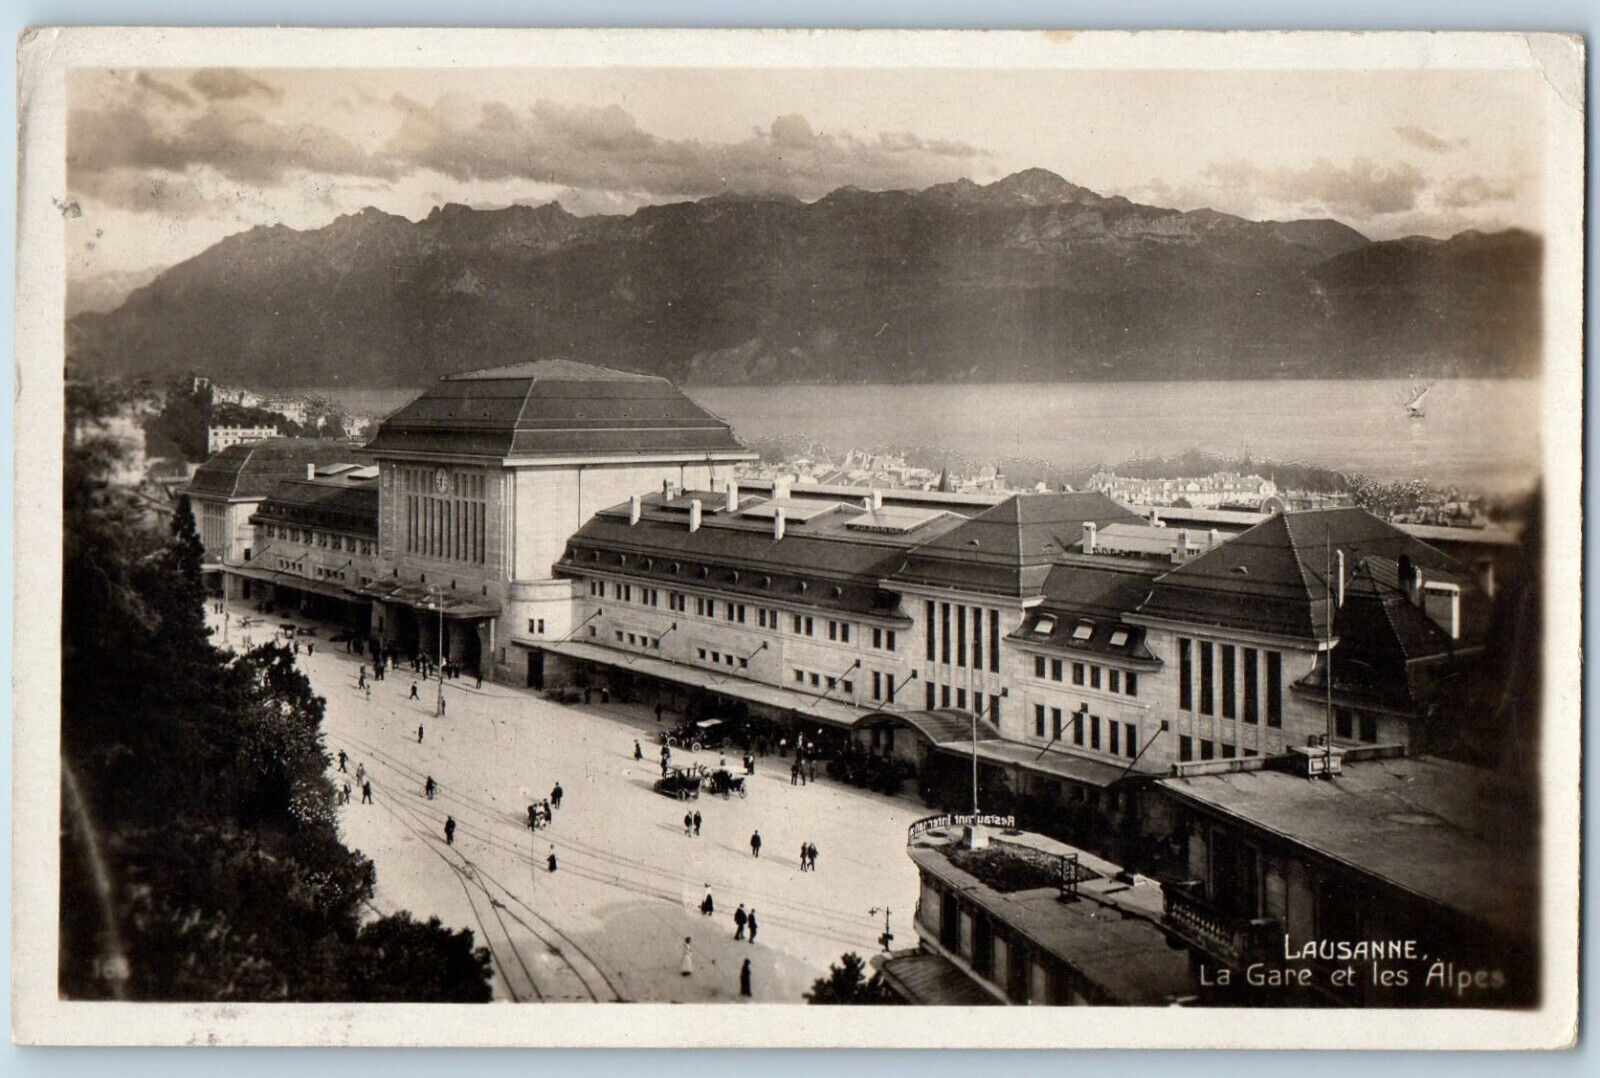 Lausanne Vaud Switzerland Postcard The Station and the Alps 1927 RPPC Photo